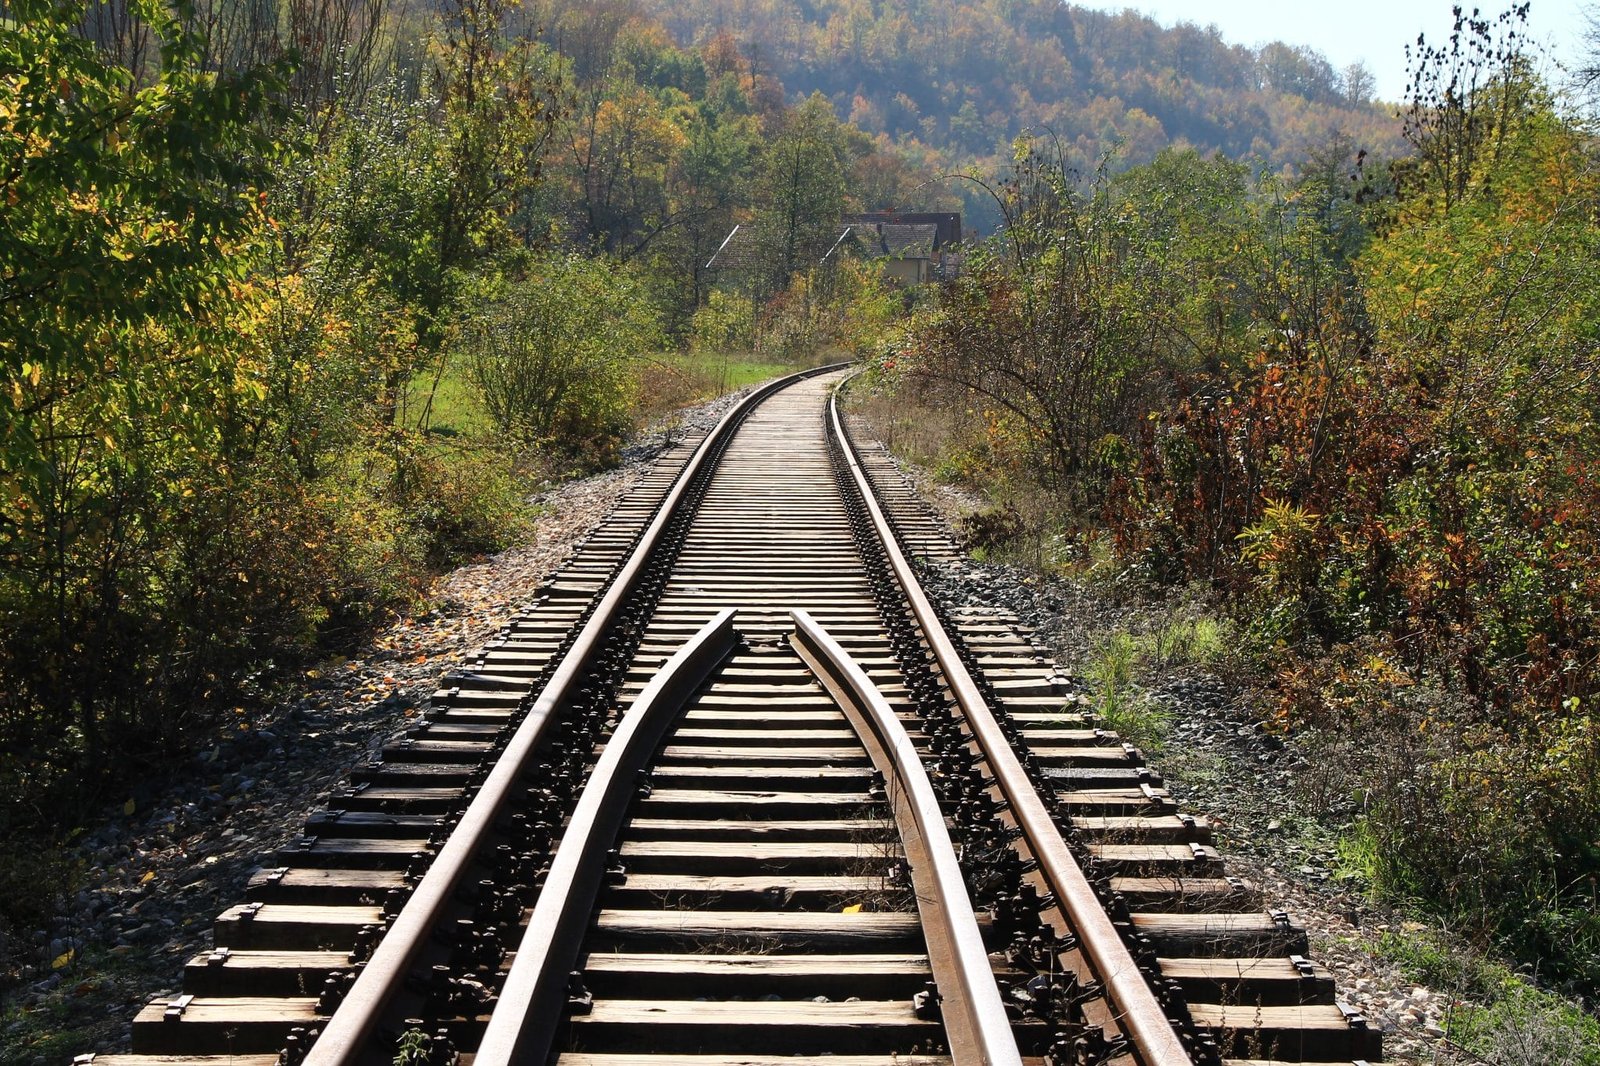 Railway track with autumn colors in Bosnia and Herzegovina